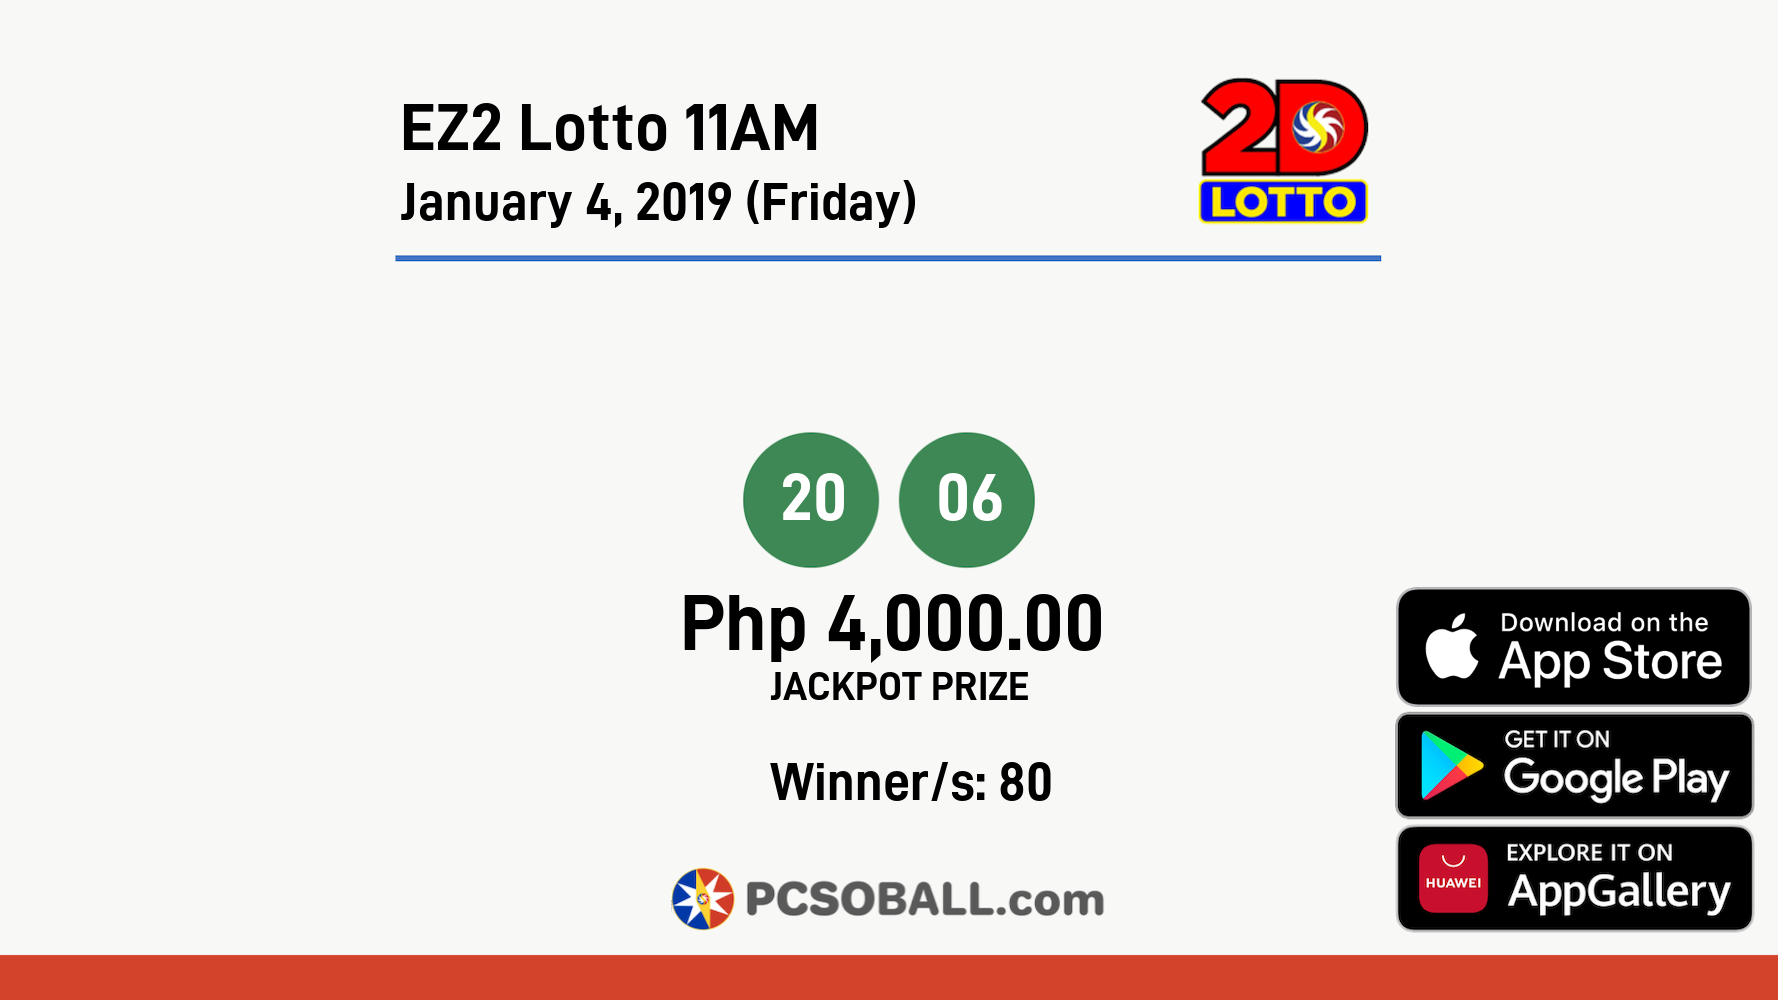 EZ2 Lotto 11AM January 4, 2019 (Friday) Result